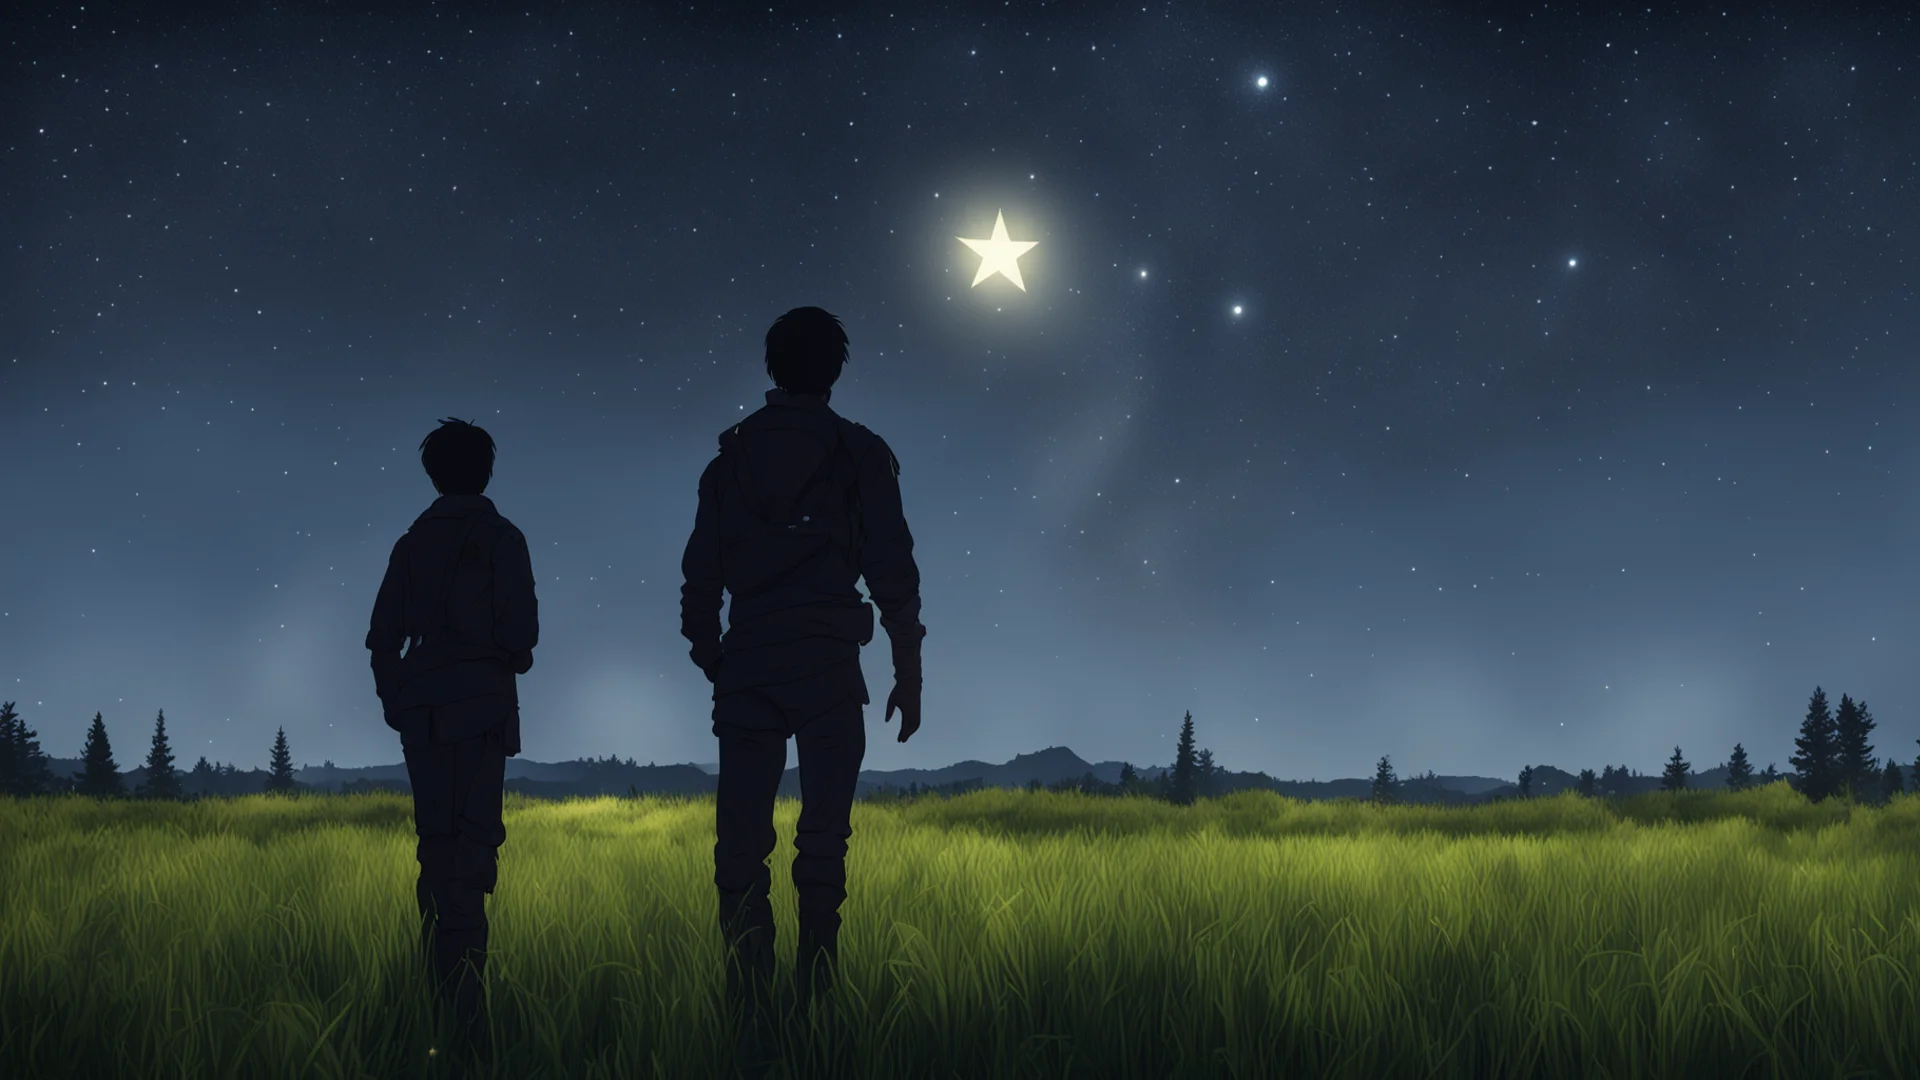 the player character stands with his back turned in a meadow at night with a star in the background amazing awesome portrait 2 wide